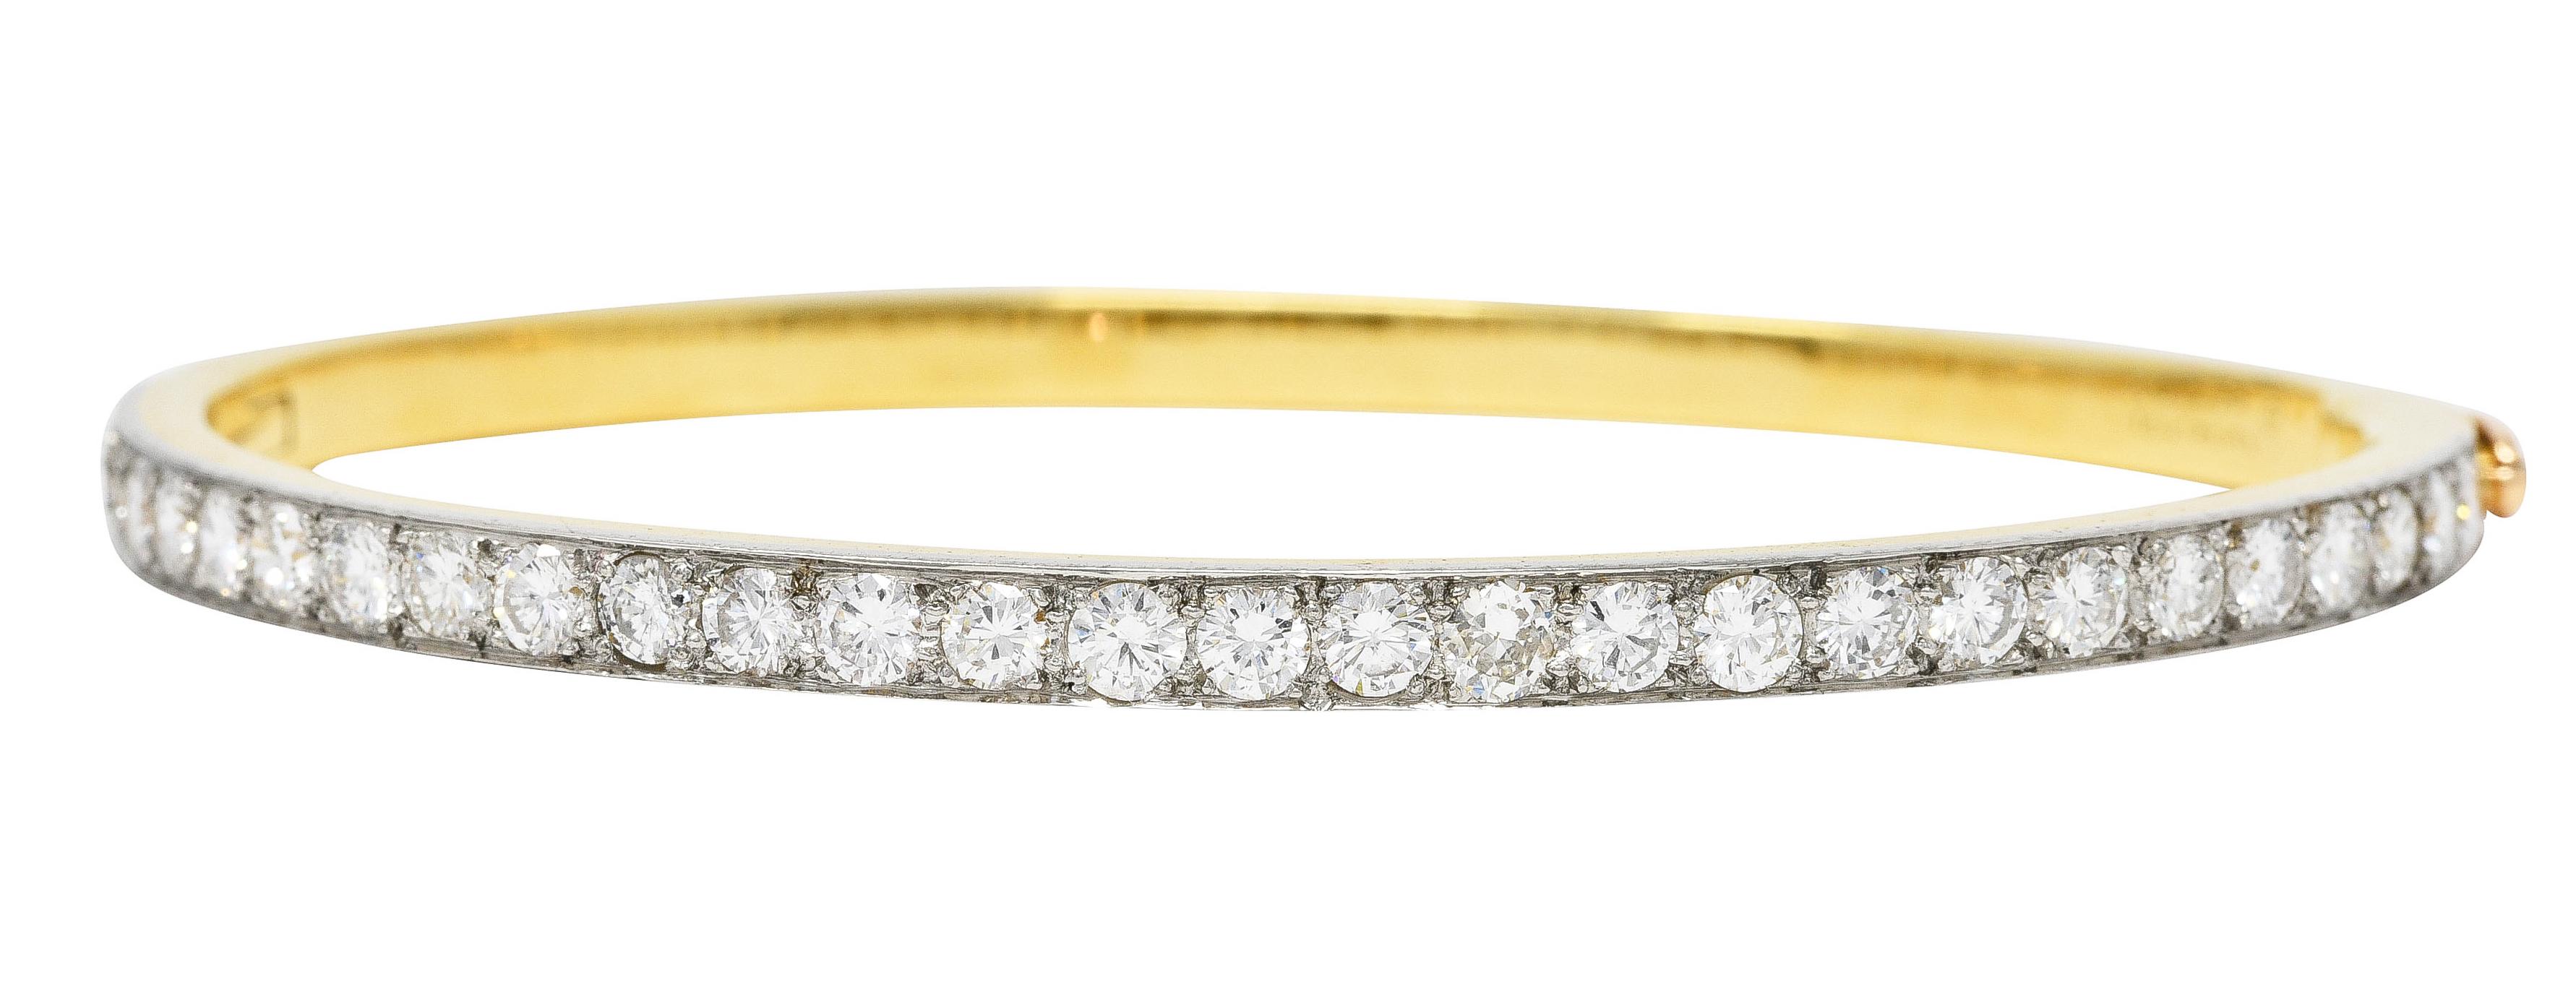 Bracelet features a platinum-topped channel of pavé set transitional cut diamonds. Weighing approximately 2.90 carats total - H to J in color with VS1 to SI1 clarity. Opens on a hinge and is completed by clasp closure with figure eight safety.